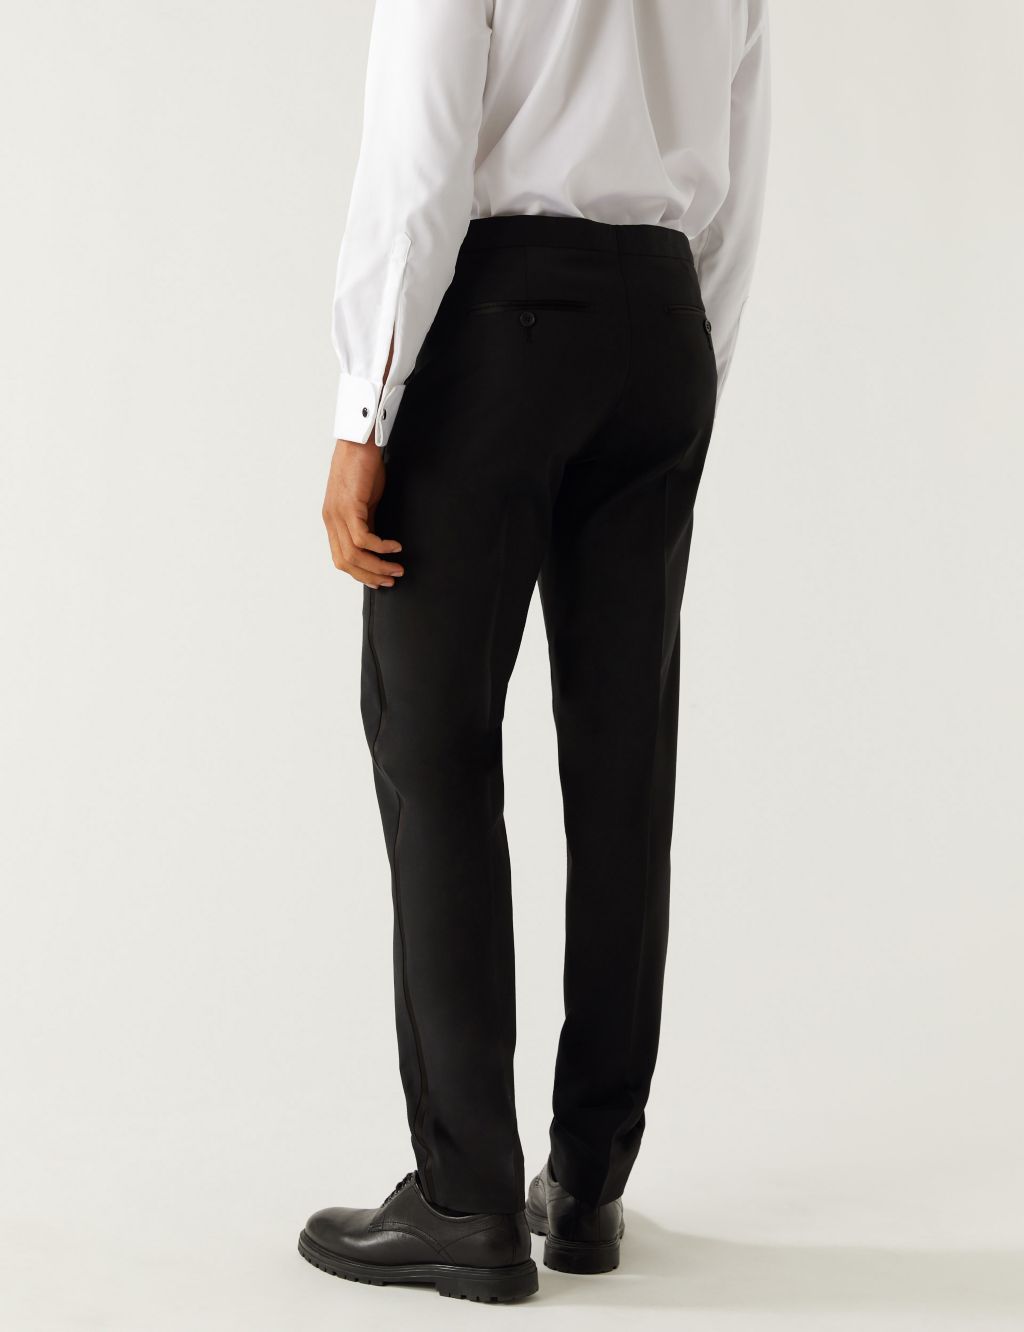 The Ultimate Tailored Fit Tuxedo image 5